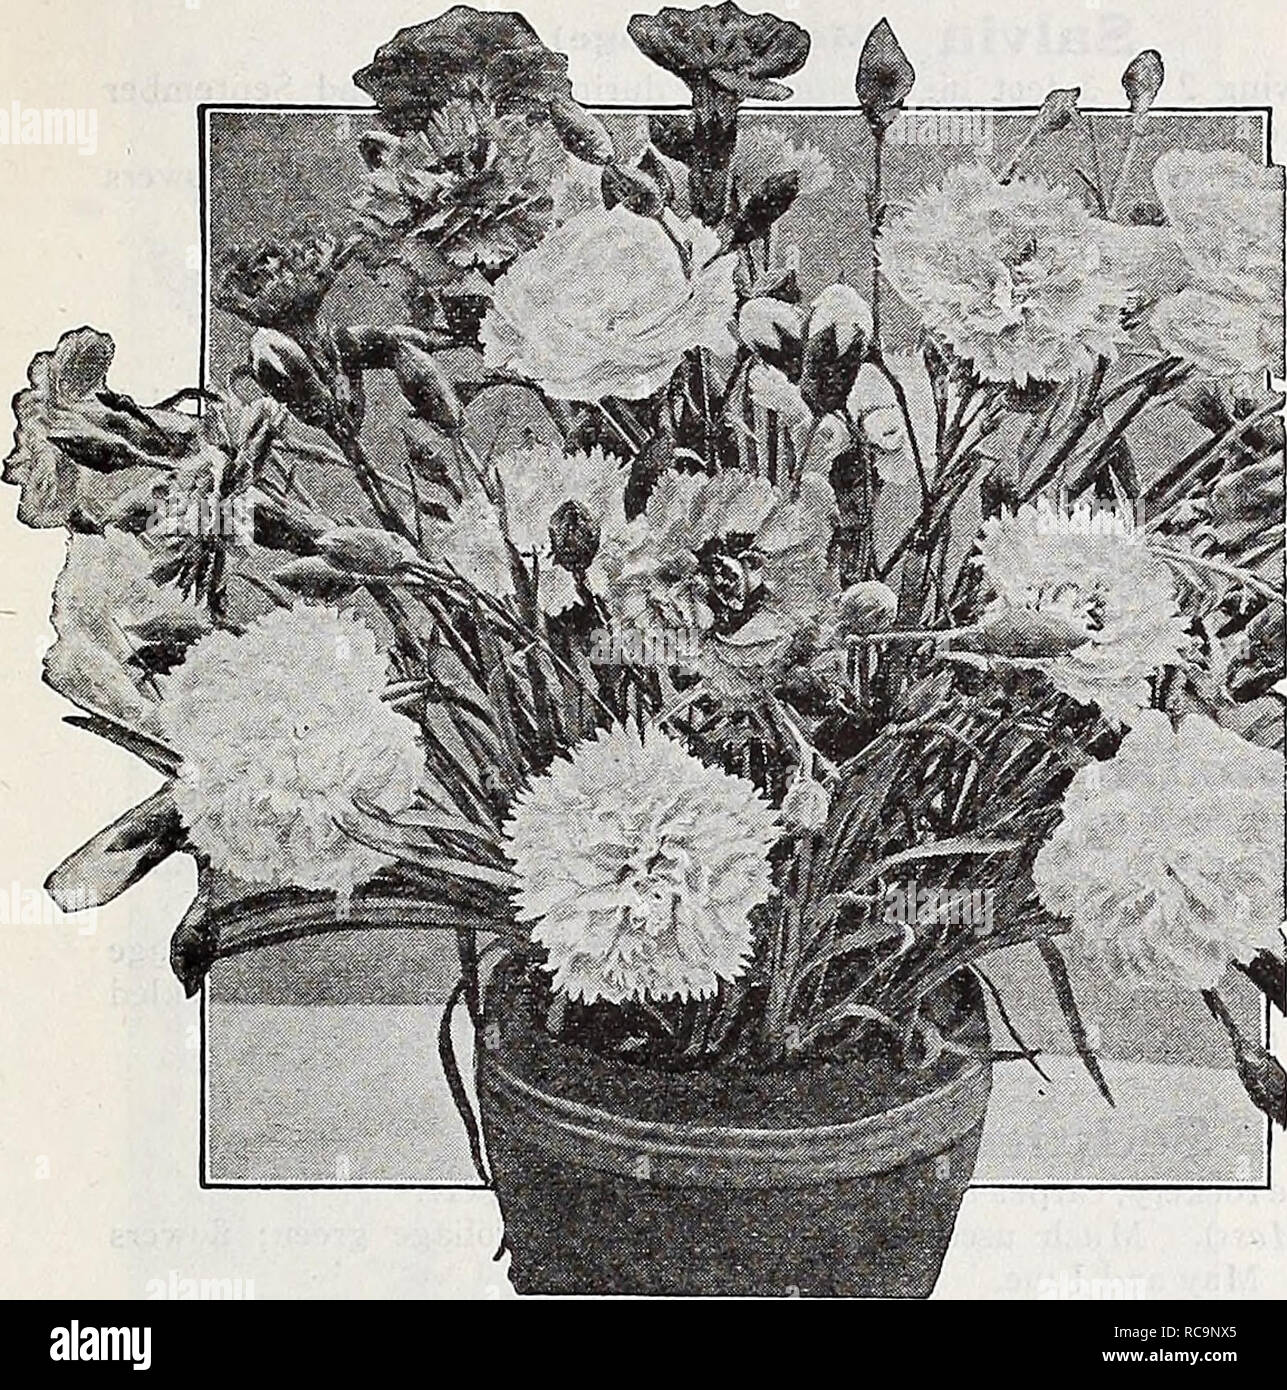 . Dreer's autumn catalogue 1932. Bulbs (Plants) Catalogs; Flowers Seeds Catalogs; Gardening Equipment and supplies Catalogs; Nurseries (Horticulture) Catalogs; Vegetables Seeds Catalogs. Hardy Pinks PhySOStegia (False Dragon Head) One of the most beautiful of our midsummer flowering perennials, forming dense bushes 4 to 6 feet high, bearing spikes of delicate tubular flowers not unlike a gigantic heather. Virginica. Bright but soft pink. — Alba. Pure white; very fine. — Grandiflora Vivid. A new variety growing from 18 to 24 inches high with flowers much larger than the type and of a bright vio Stock Photo